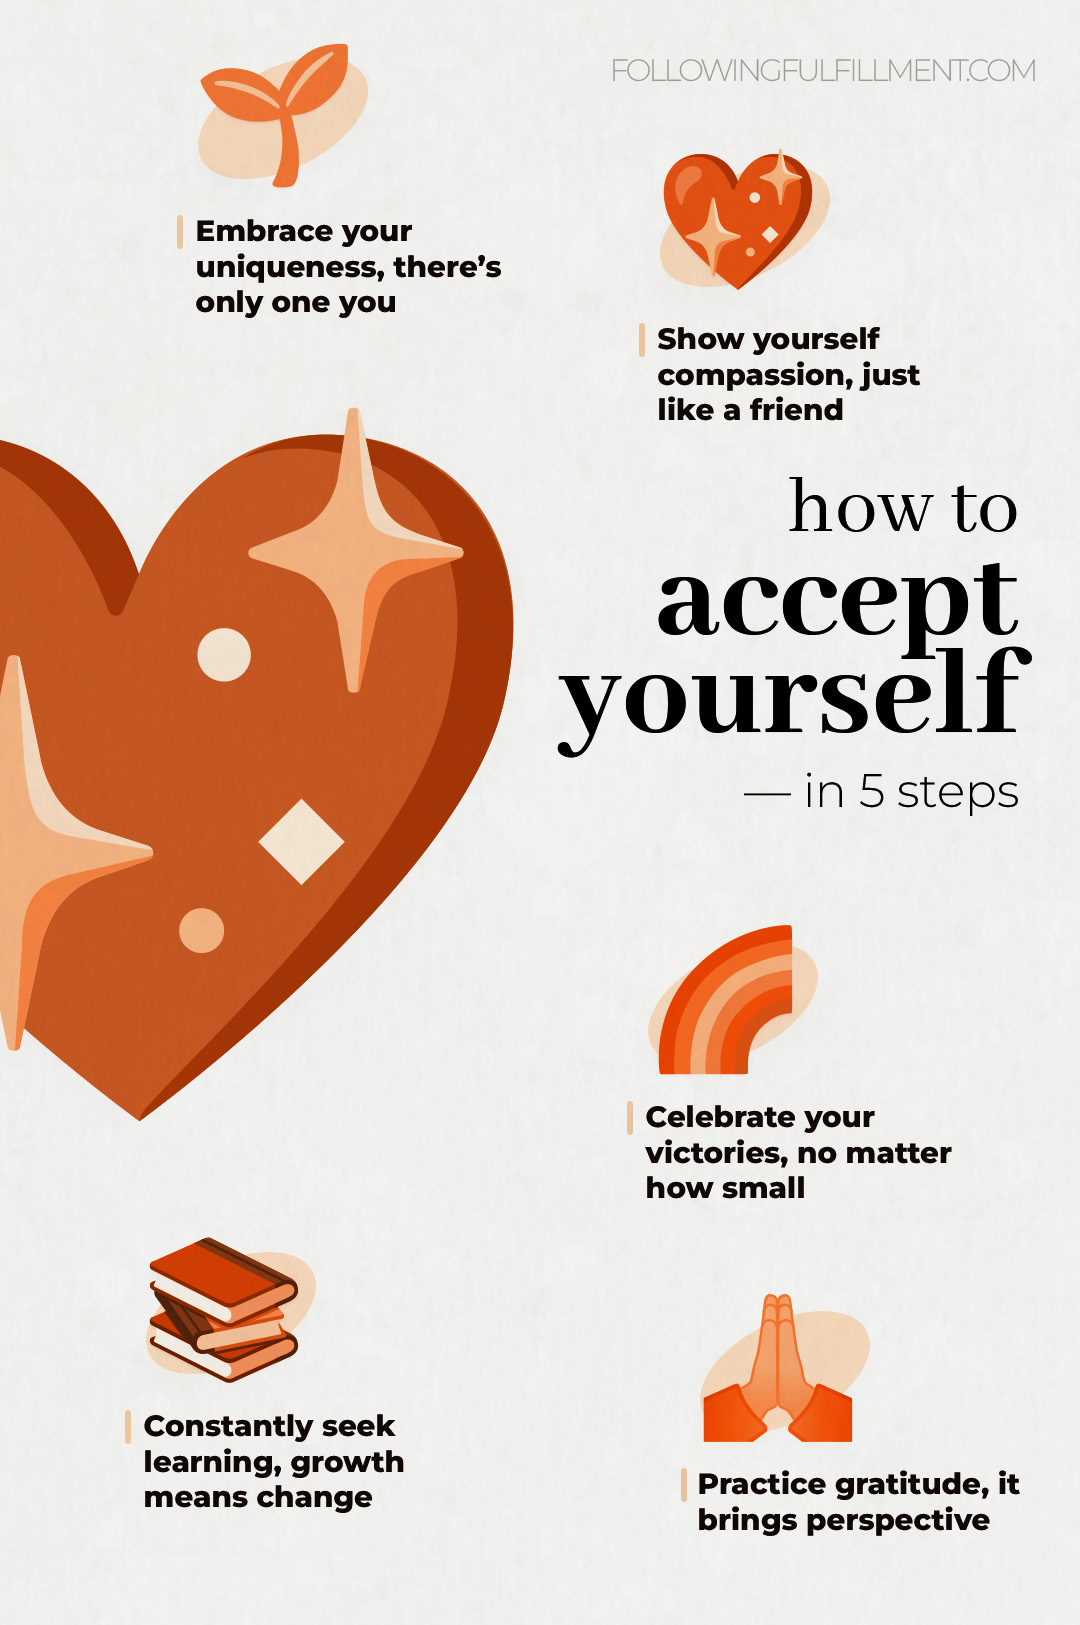 How To Accept Yourself guide step